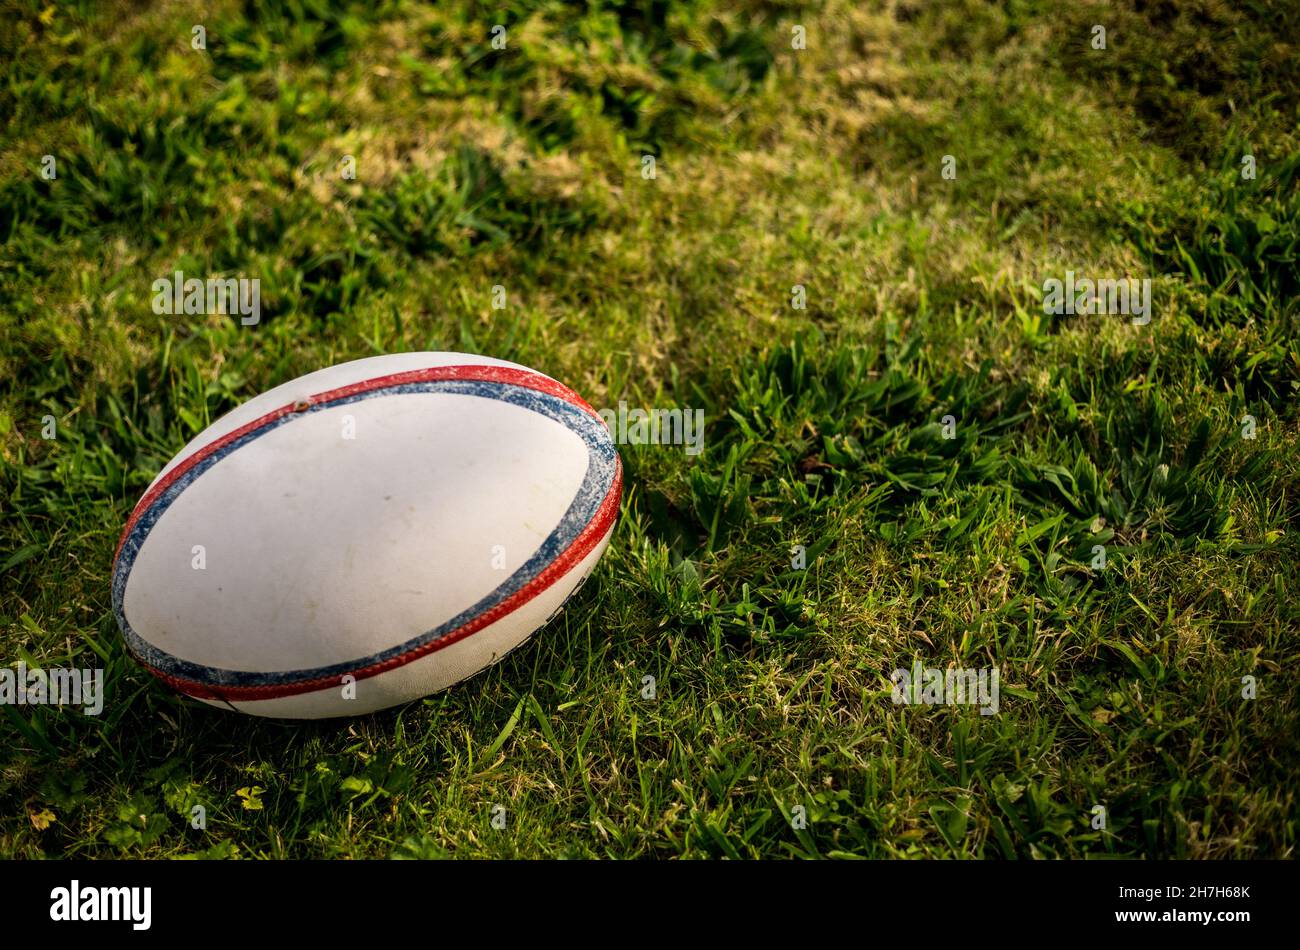 Rugby  ball , Gilbert ,on sports field with green grass for the game of rugby. Focus on ball, sports base at background. Stock Photo